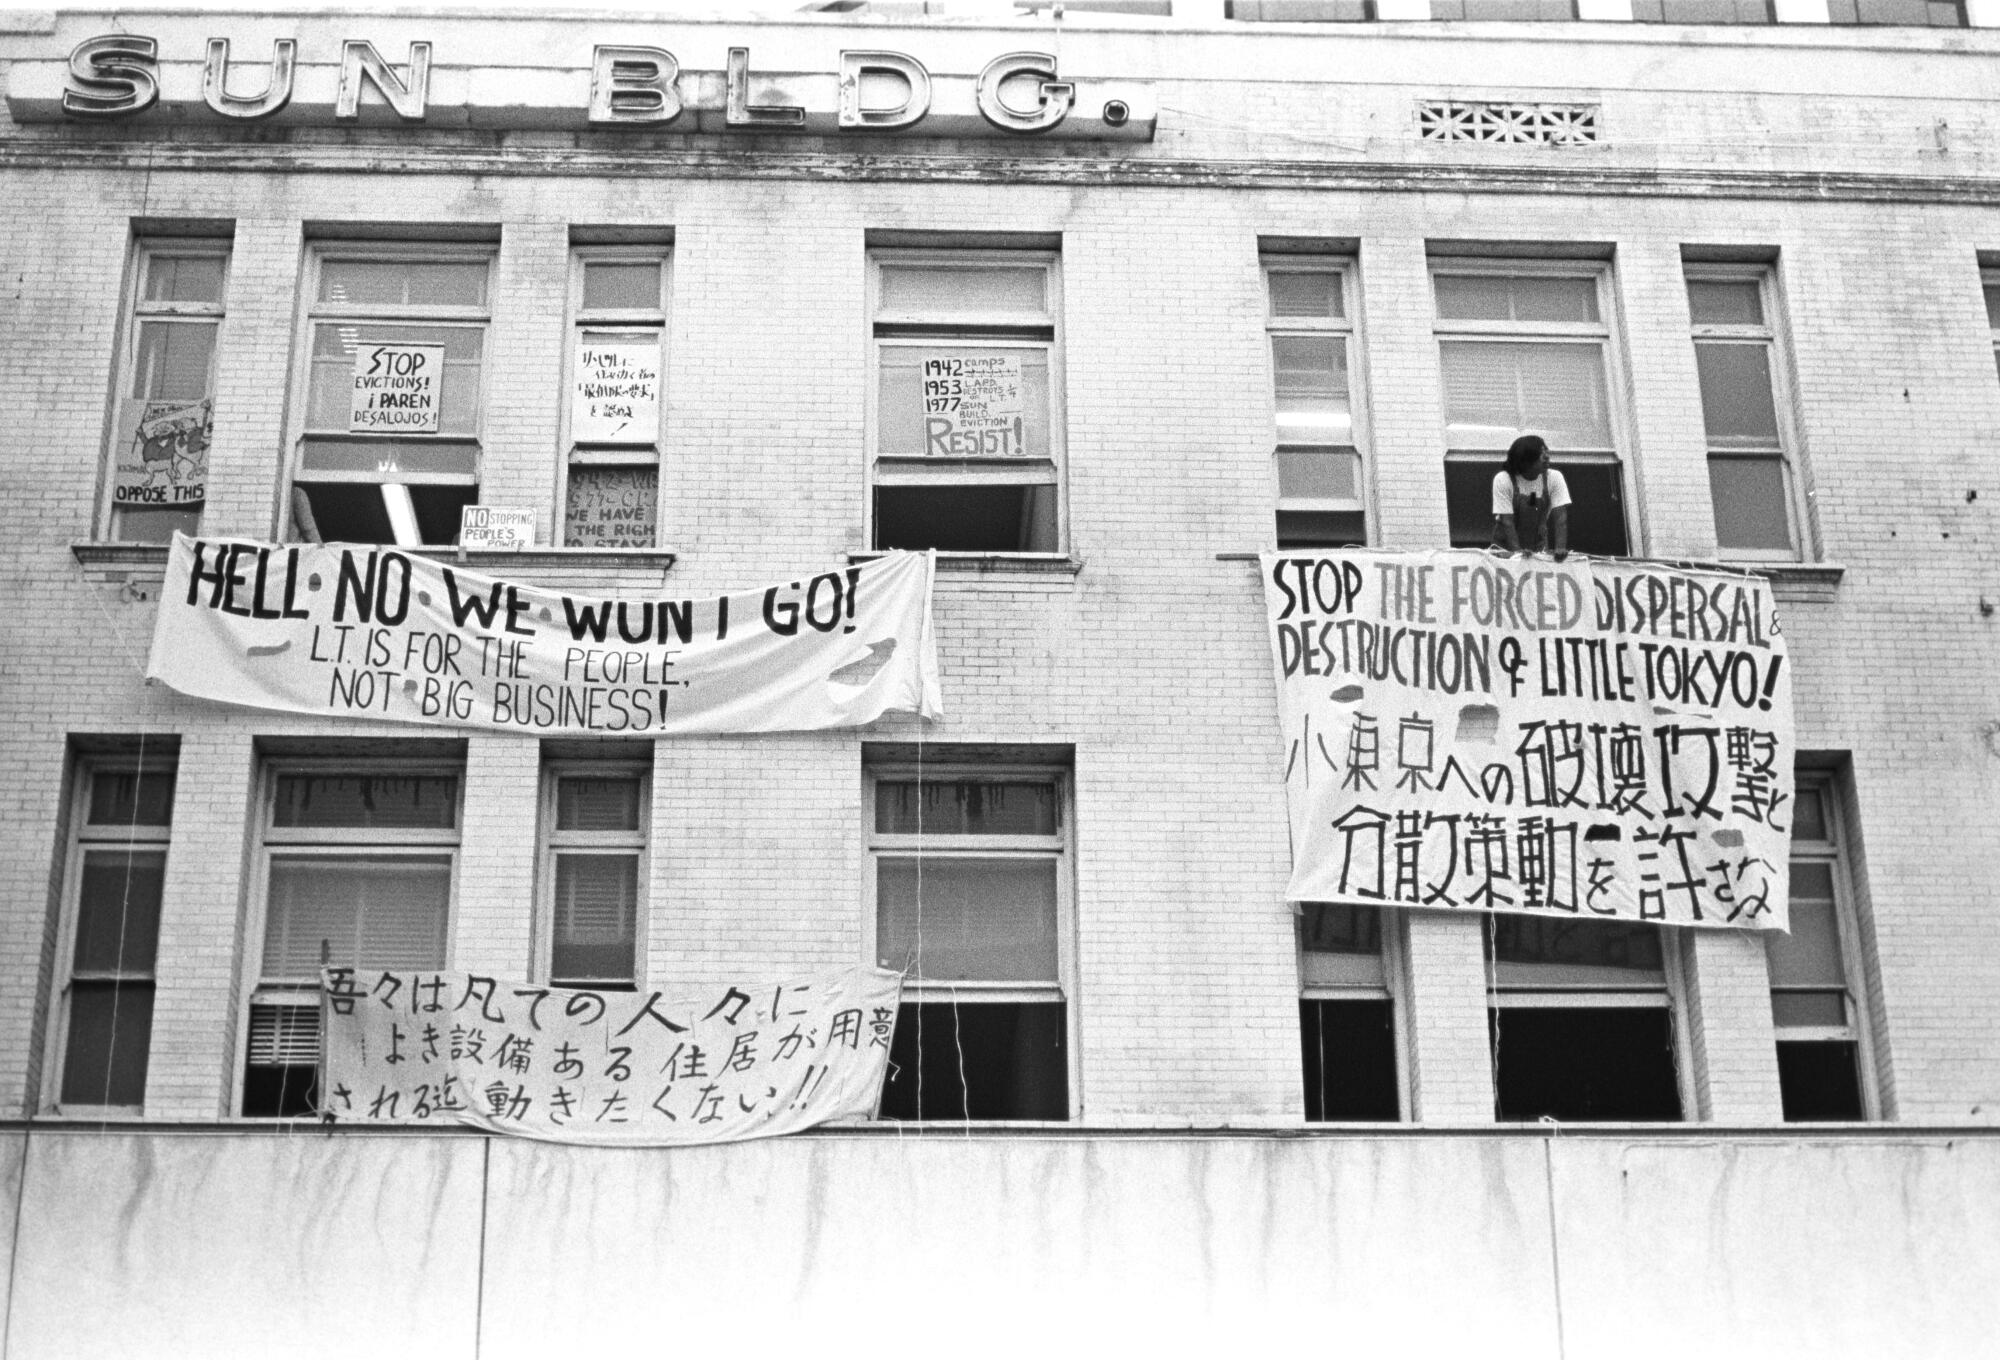 People hang protest signs outside the windows of a building.